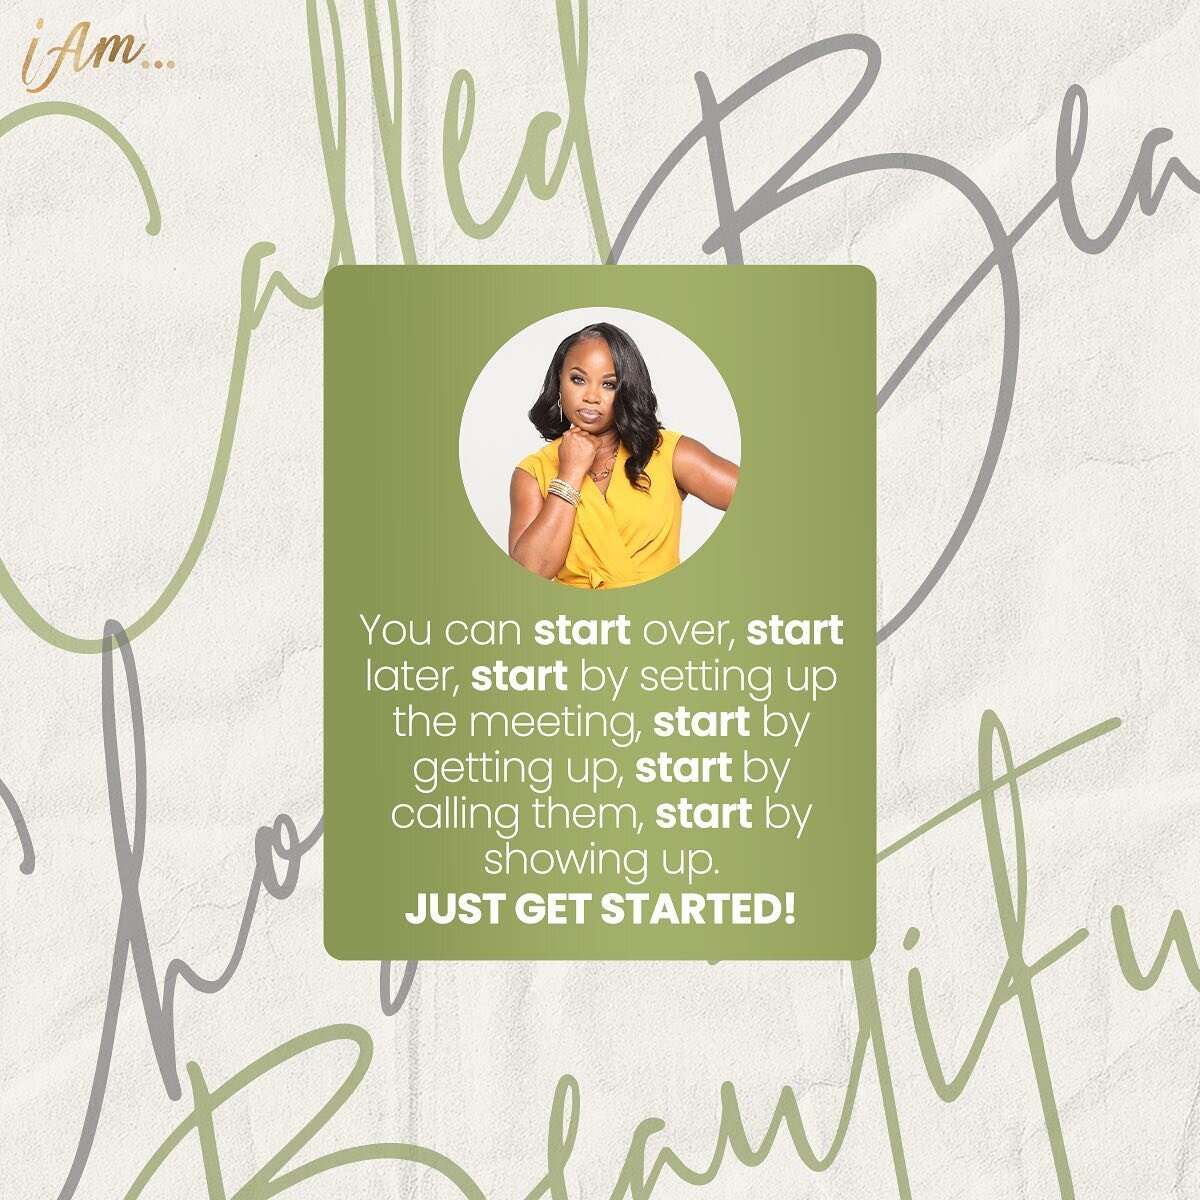 Fam remember&hellip;JUST GET STARTED! 

The first step is staring. That&rsquo;s it l, that&rsquo;s the post. 💚